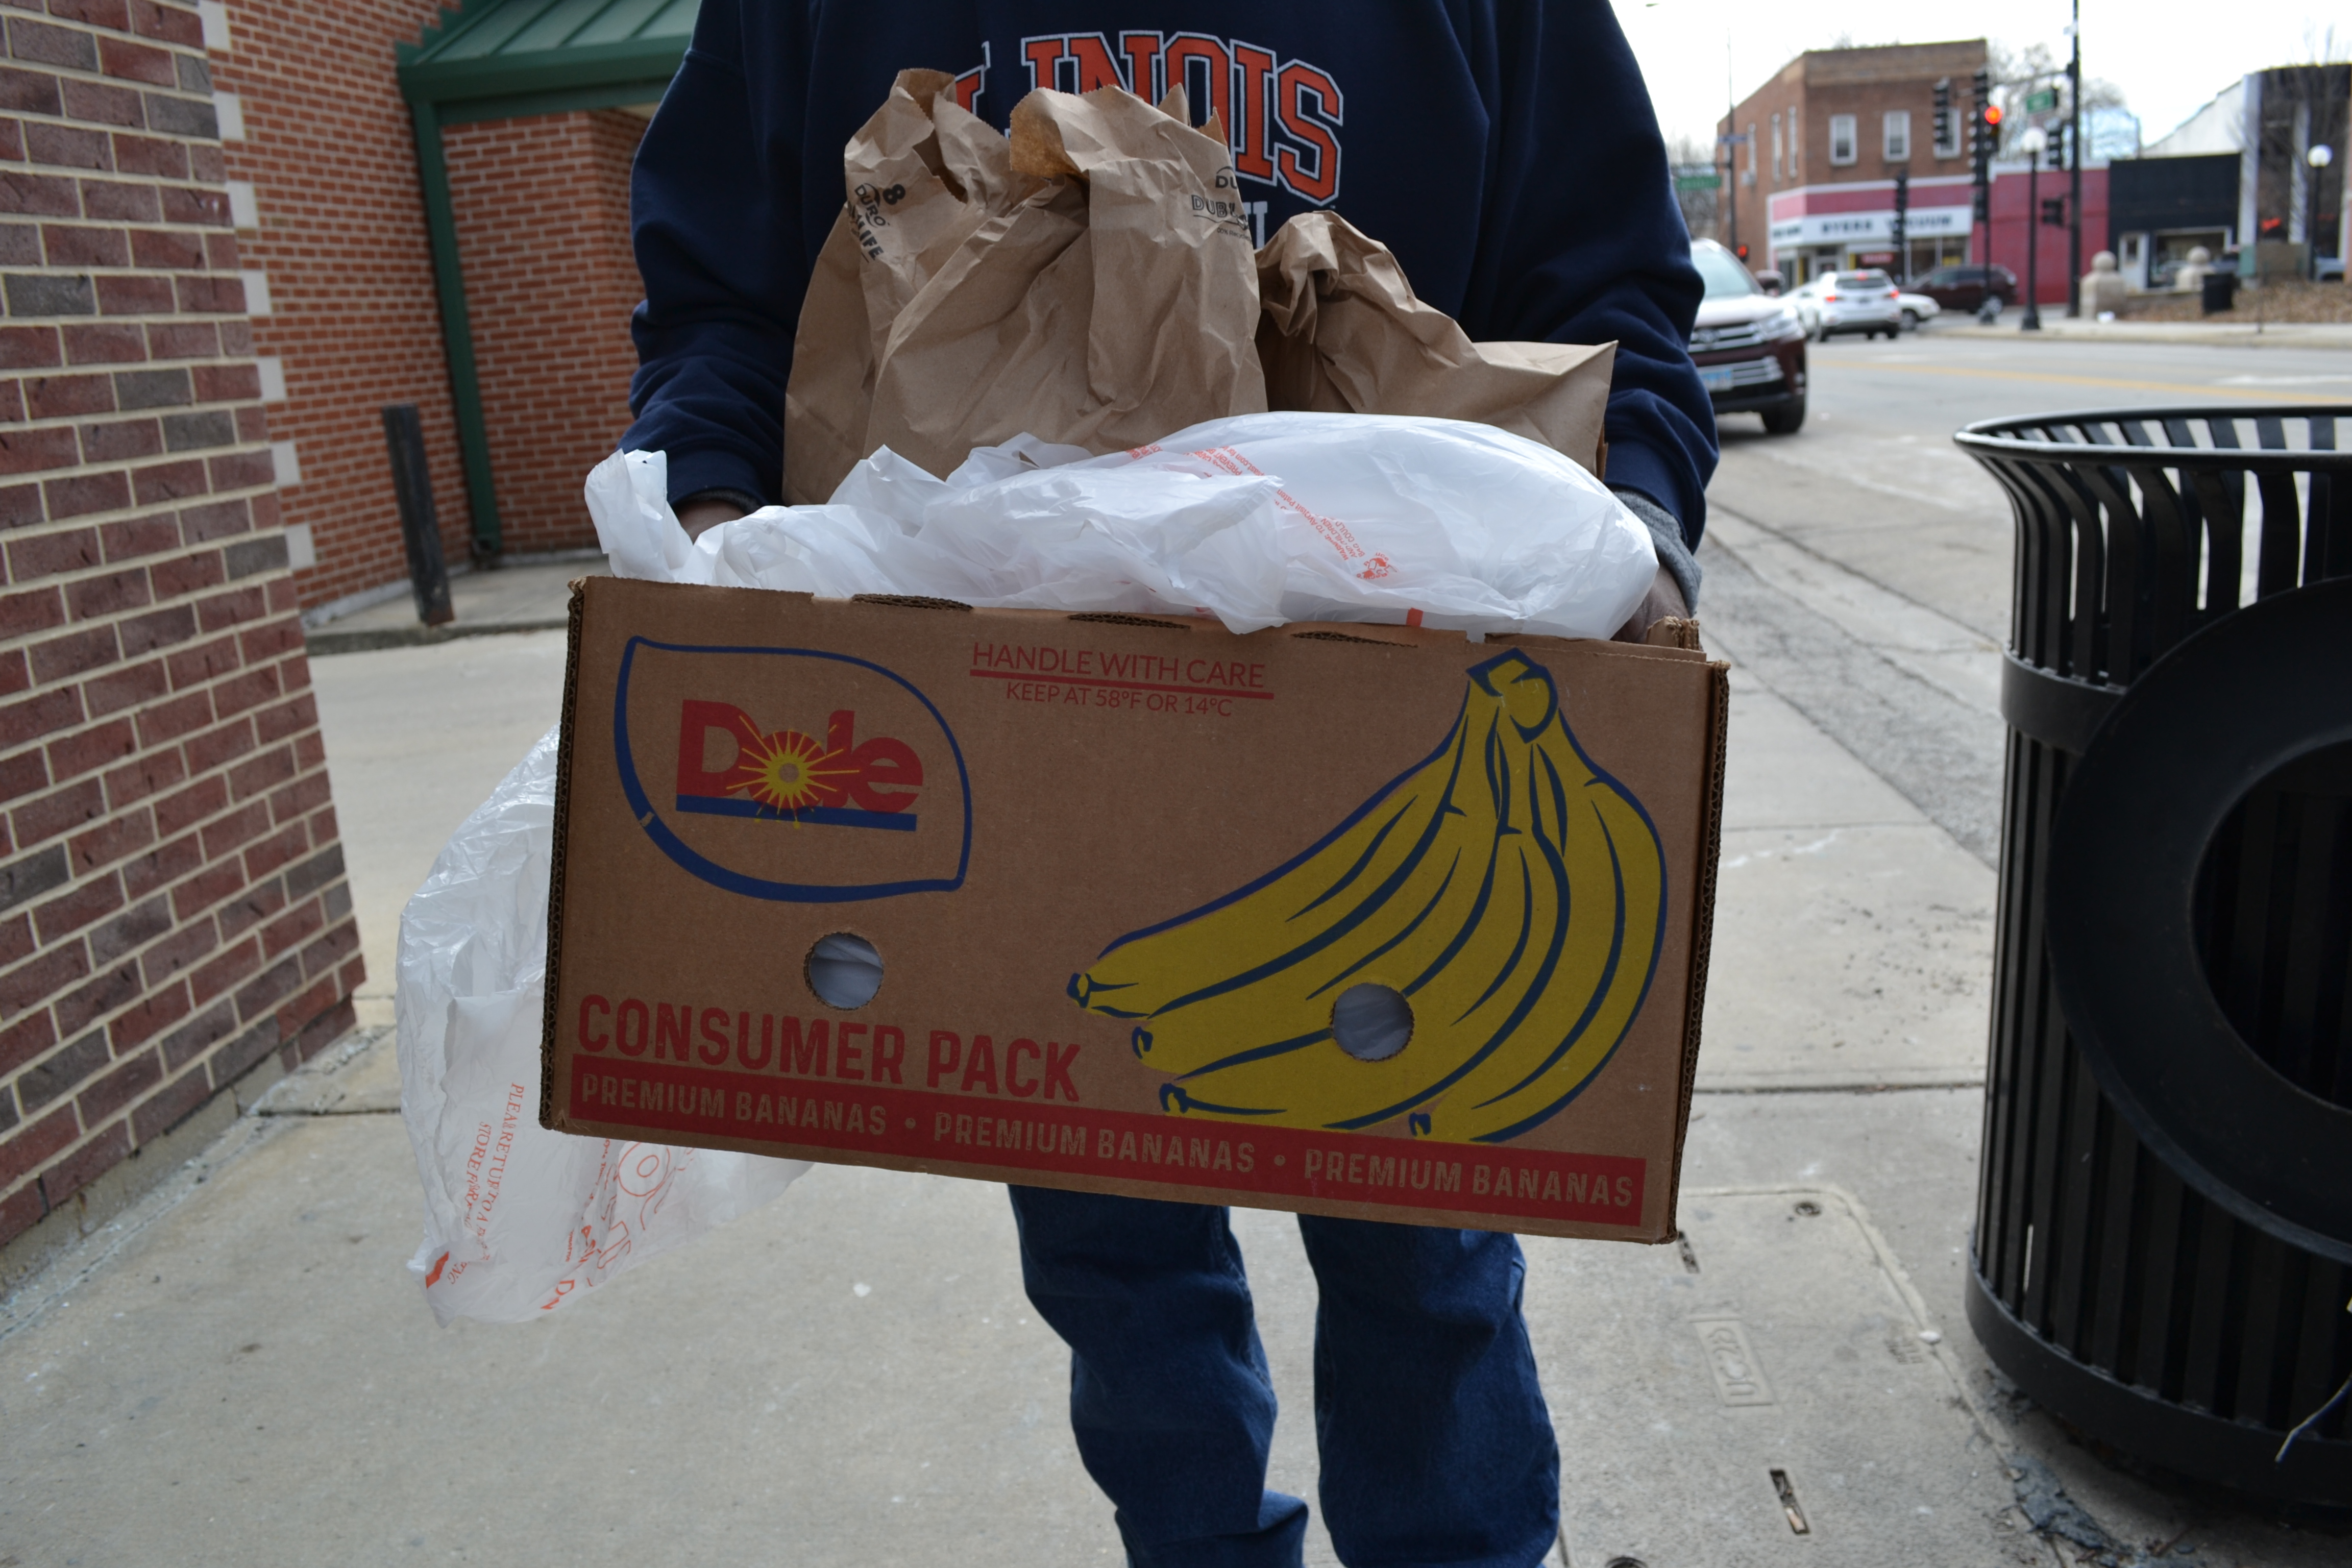 One guest of the Daily Bread Soup Kitchen holds his box of food. The box is a re-used banana box now holding hot lunches and sack lunches to go. Photo by Alyssa Buckley.